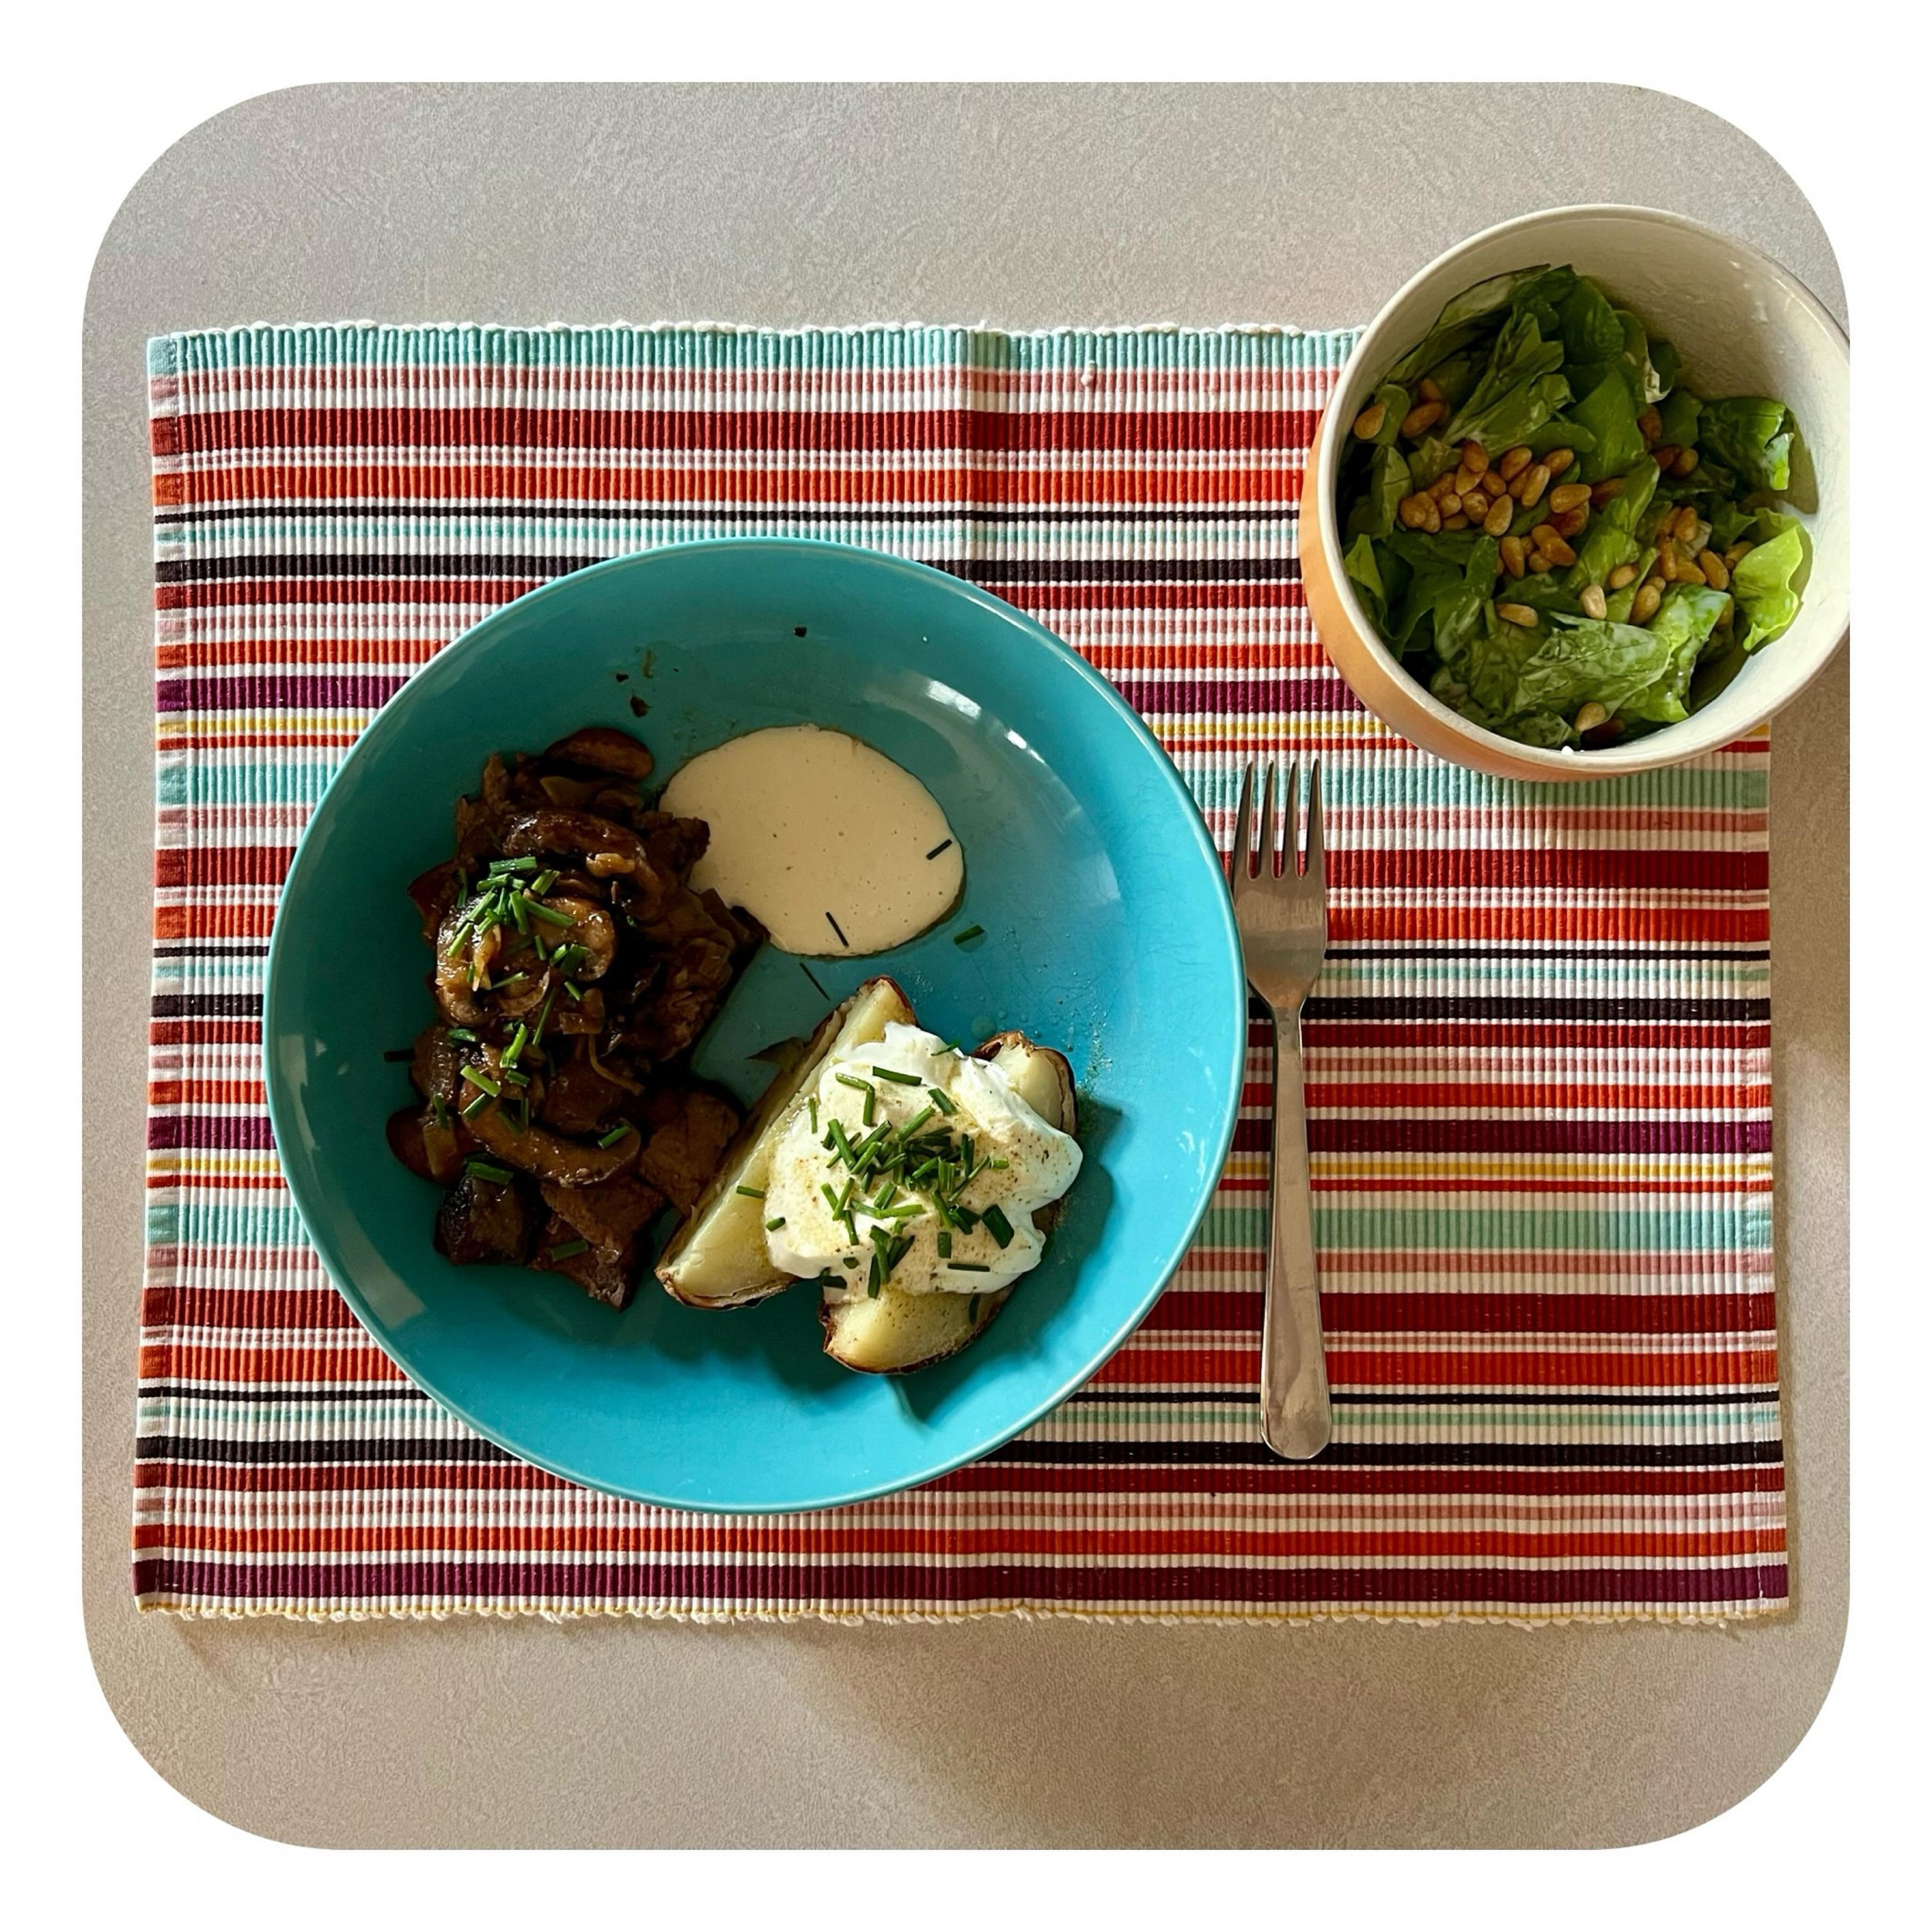 745 cals &bull; Dinner. Leftovers from yesterday: 4.2 oz steak topped with sauteed mushrooms, horseradish sauce, 1/2 baked potato with butter &amp; greek yogurt, green salad with toasted pine nuts.

I adjusted dinner from last night to lower the calo